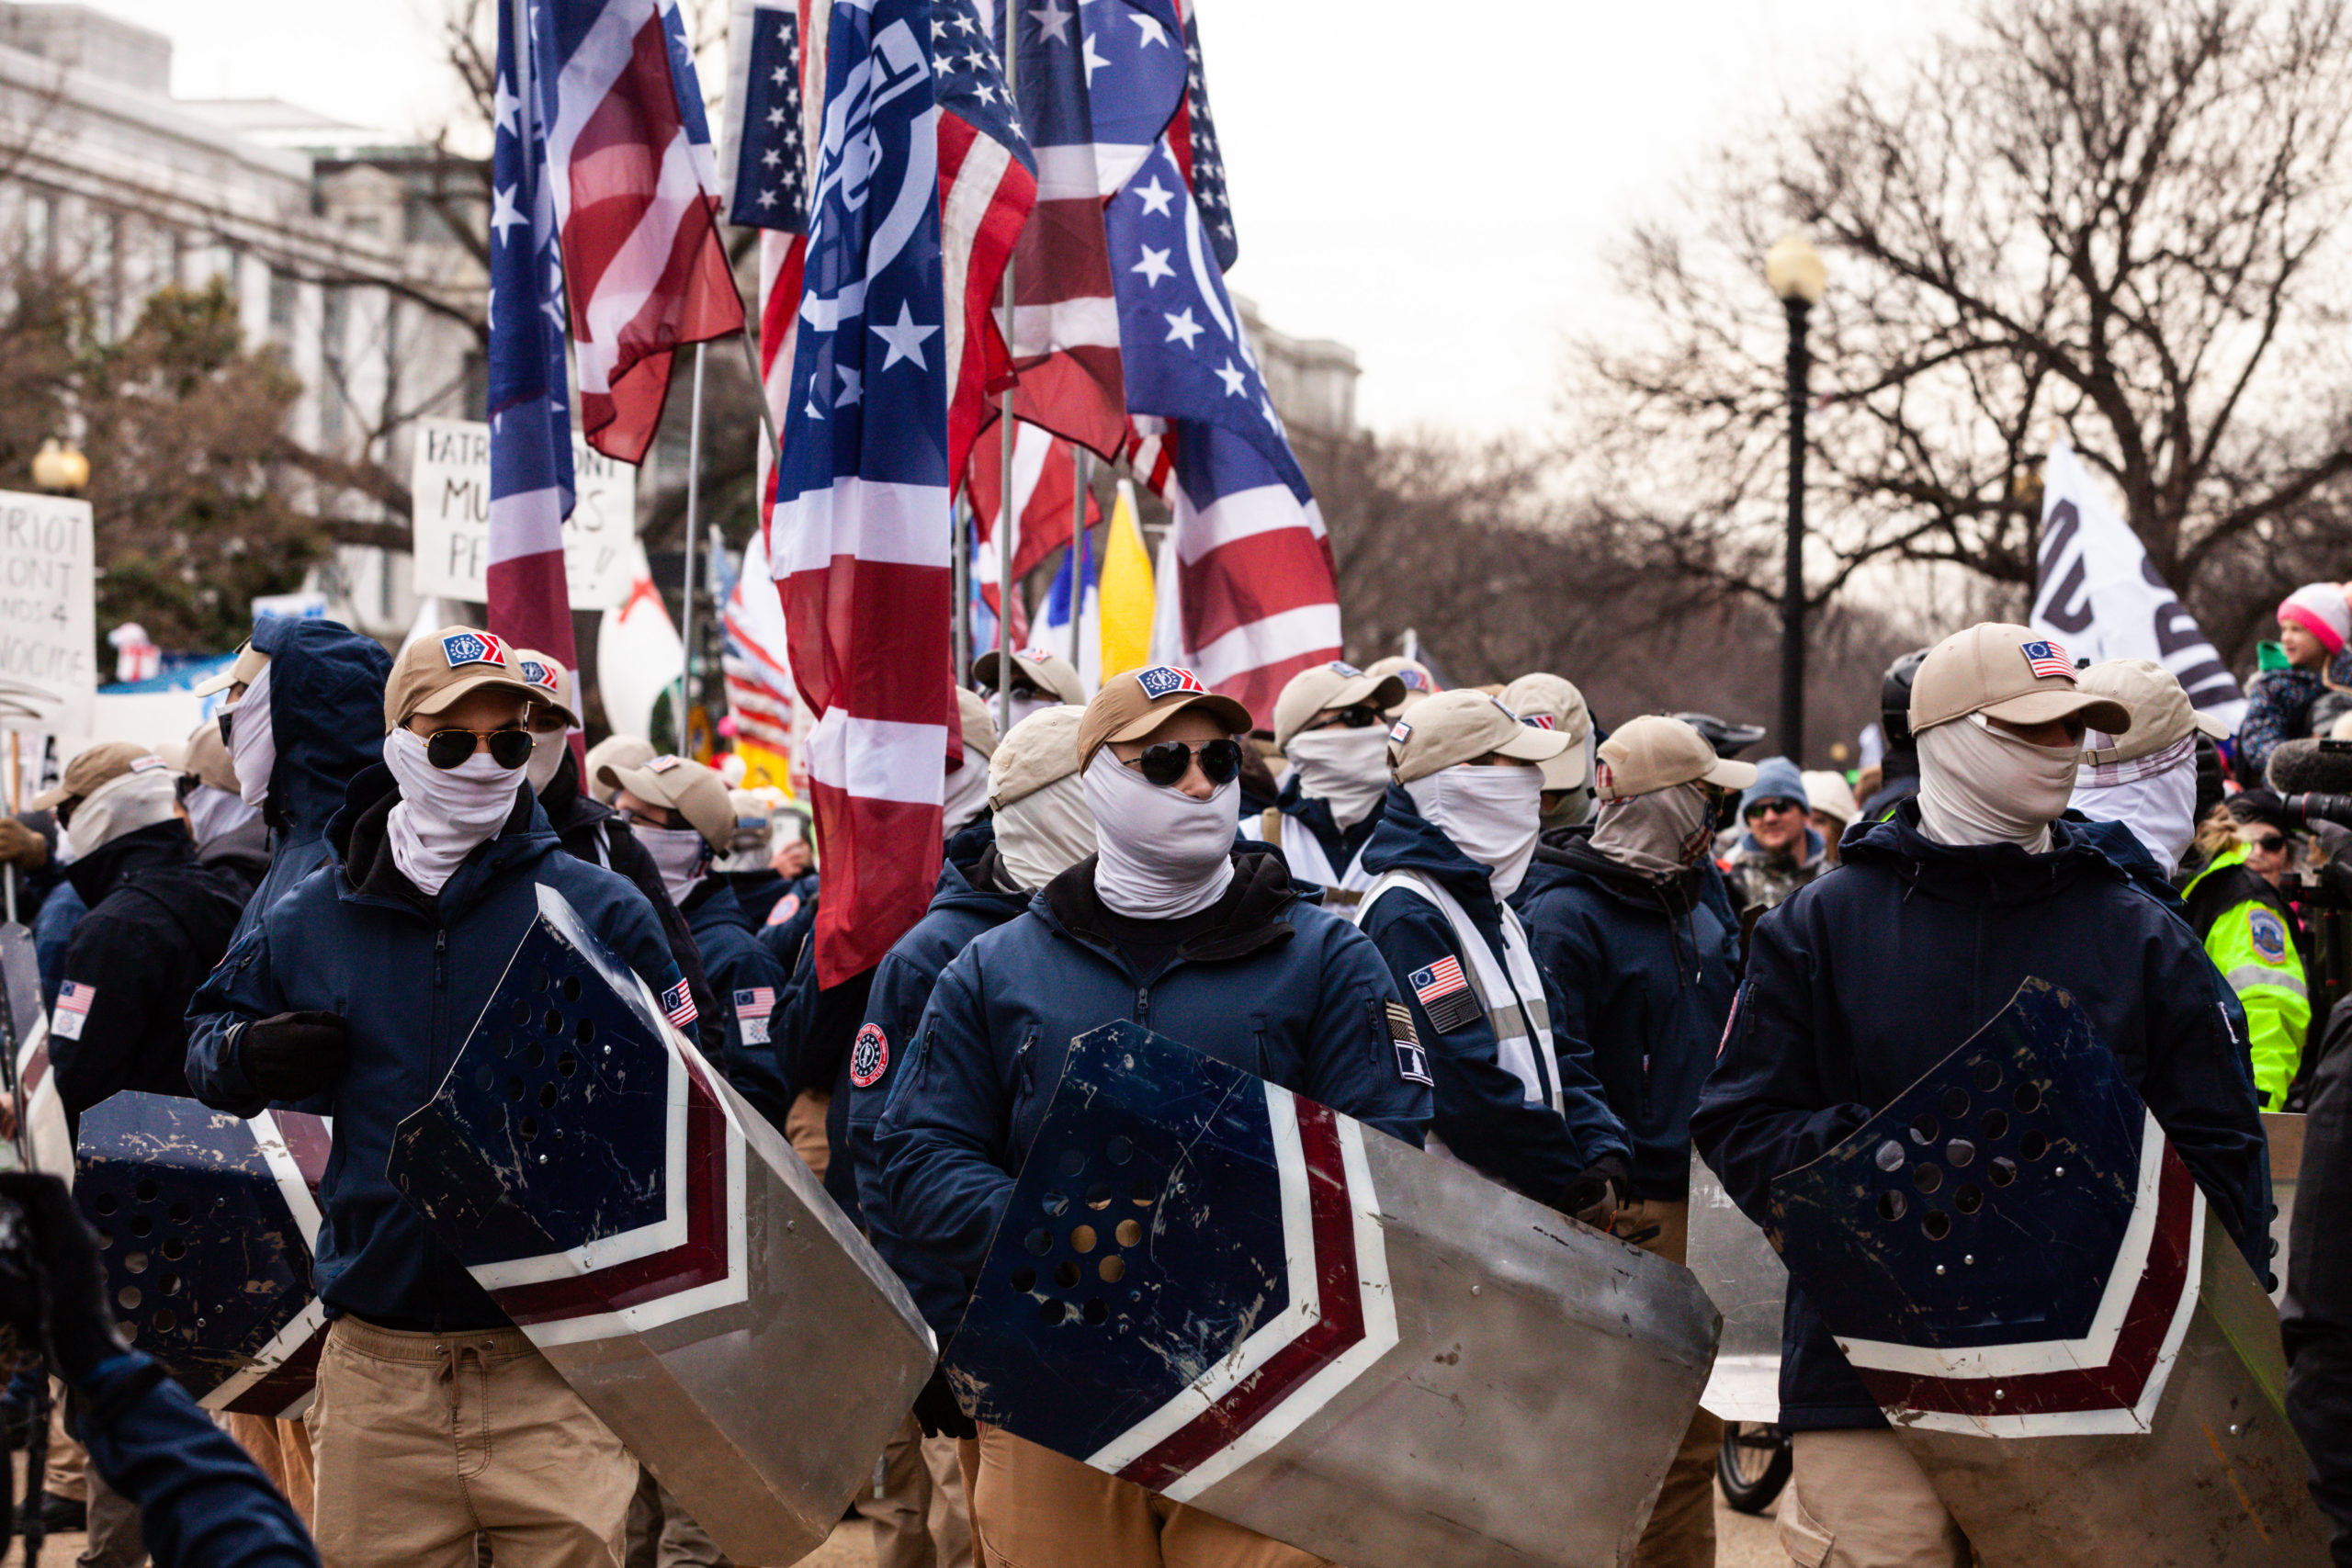 Patriot Front members stand in formation as they prepare to march, wearing blue jackets and white gaiters. They are carrying blue and white shields, and modifed American flags with a fasces on them. Patriot Front now face a lawsuit relating to vandalism of a mural.